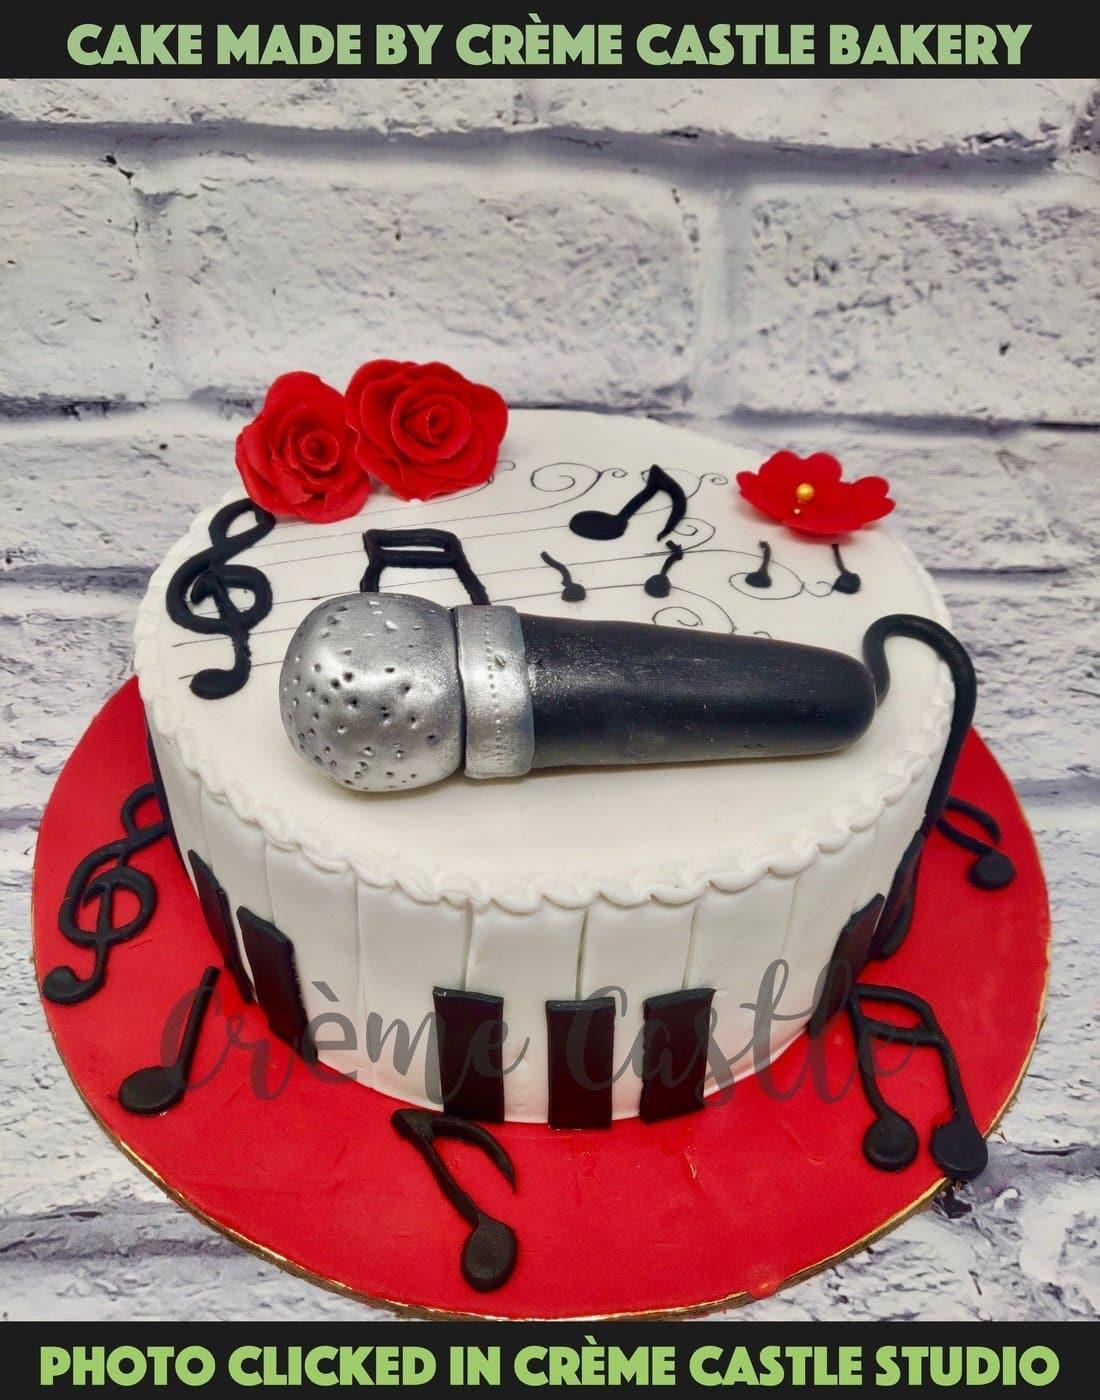 Helen's Cakes Fethiye - A 12 inch square vanilla sponge for the birthday of  a music lover. #vanillasponge #birthdaycake #microphone #musiclover  #cakesfethiye | Facebook